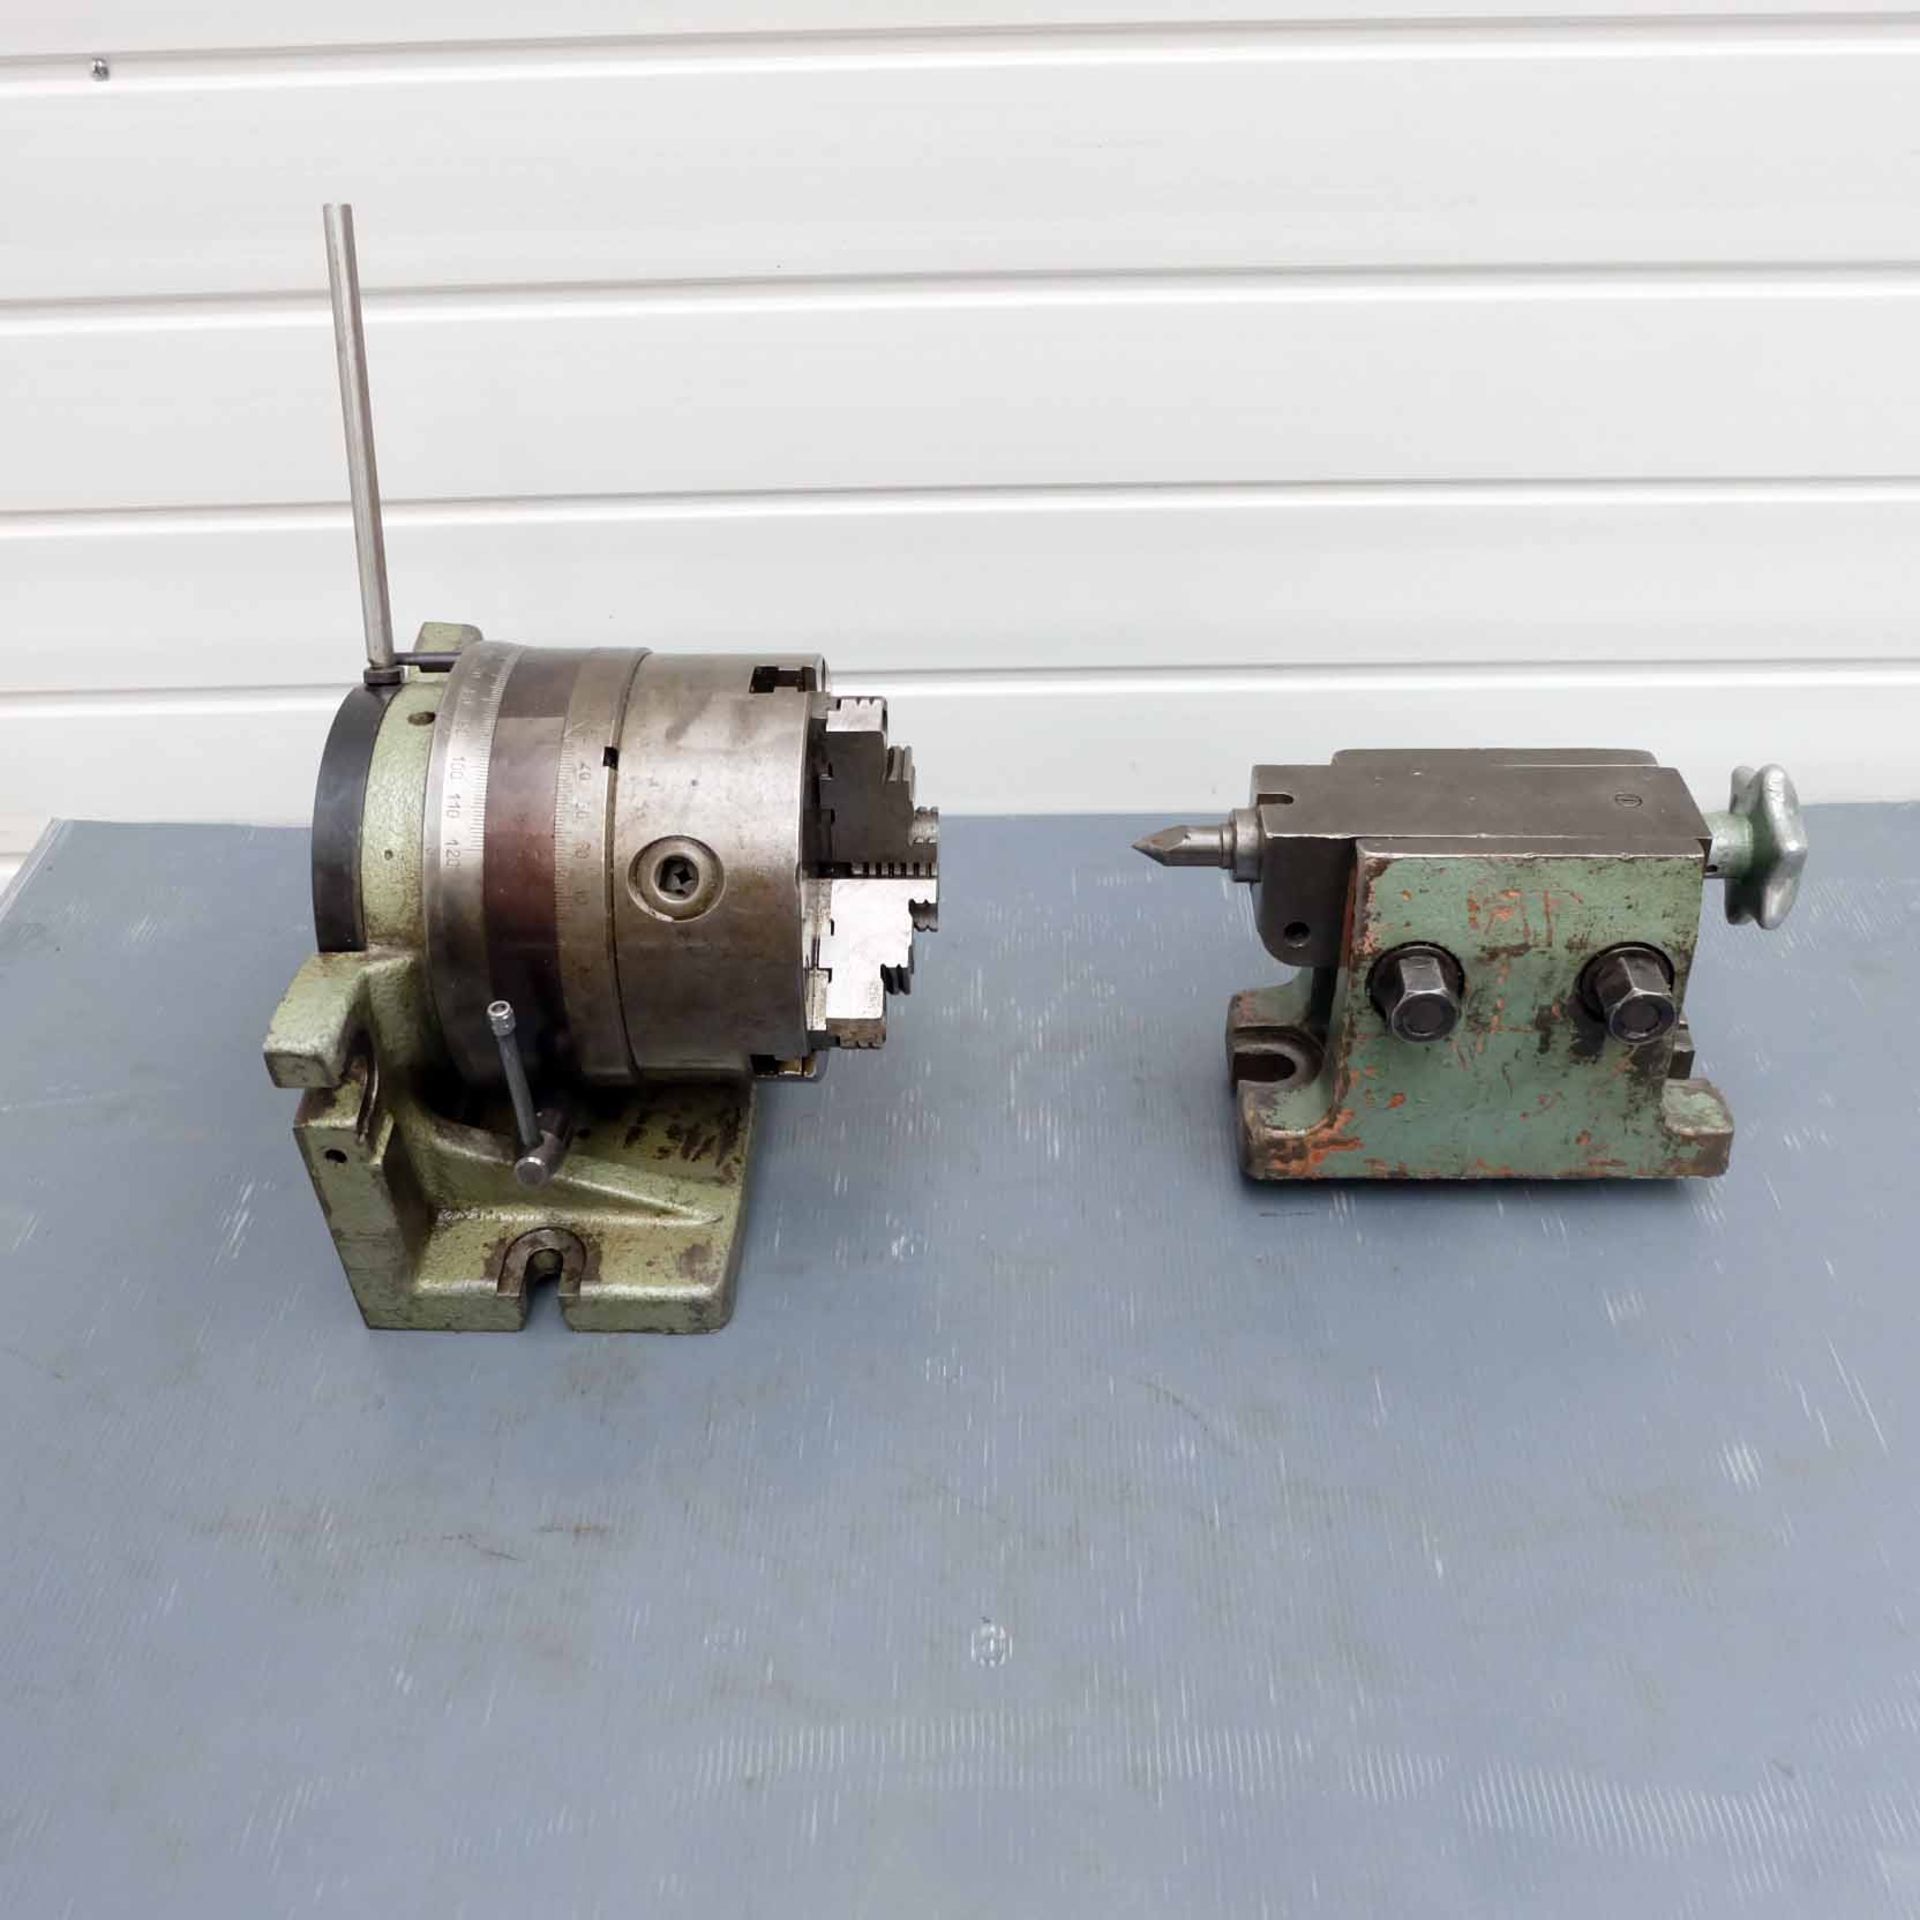 Vertical / Horizontal Indexing Workhead. With 6" 3 Jaw Chuck. Tailstock. - Image 5 of 11